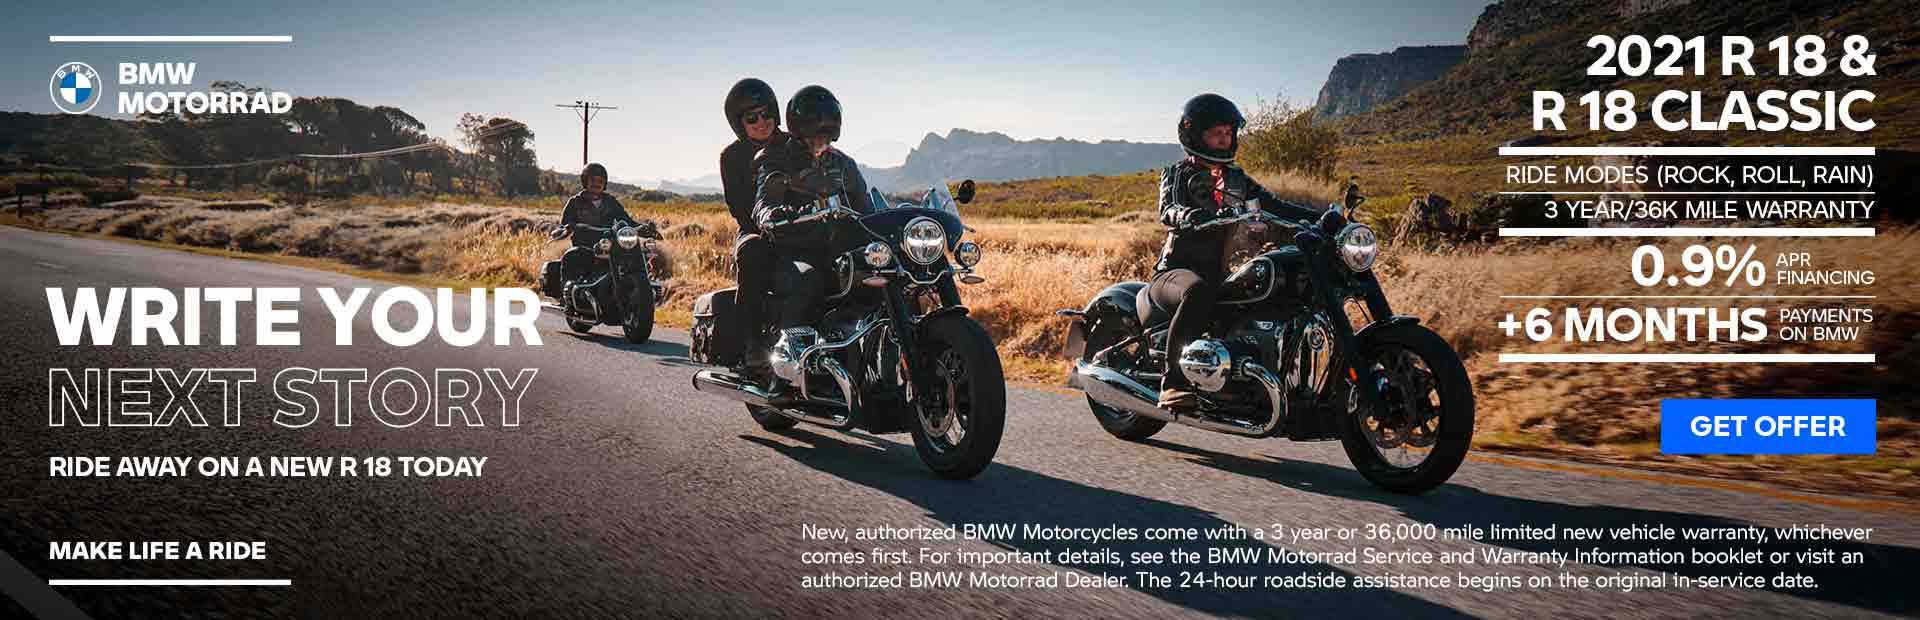 BMW - 2022 R 18 and R 18 Classic:  0.9% Apr Financing + BMW Makes Your Payments for 6 Months at Lynnwood Motoplex, Lynnwood, WA 98037